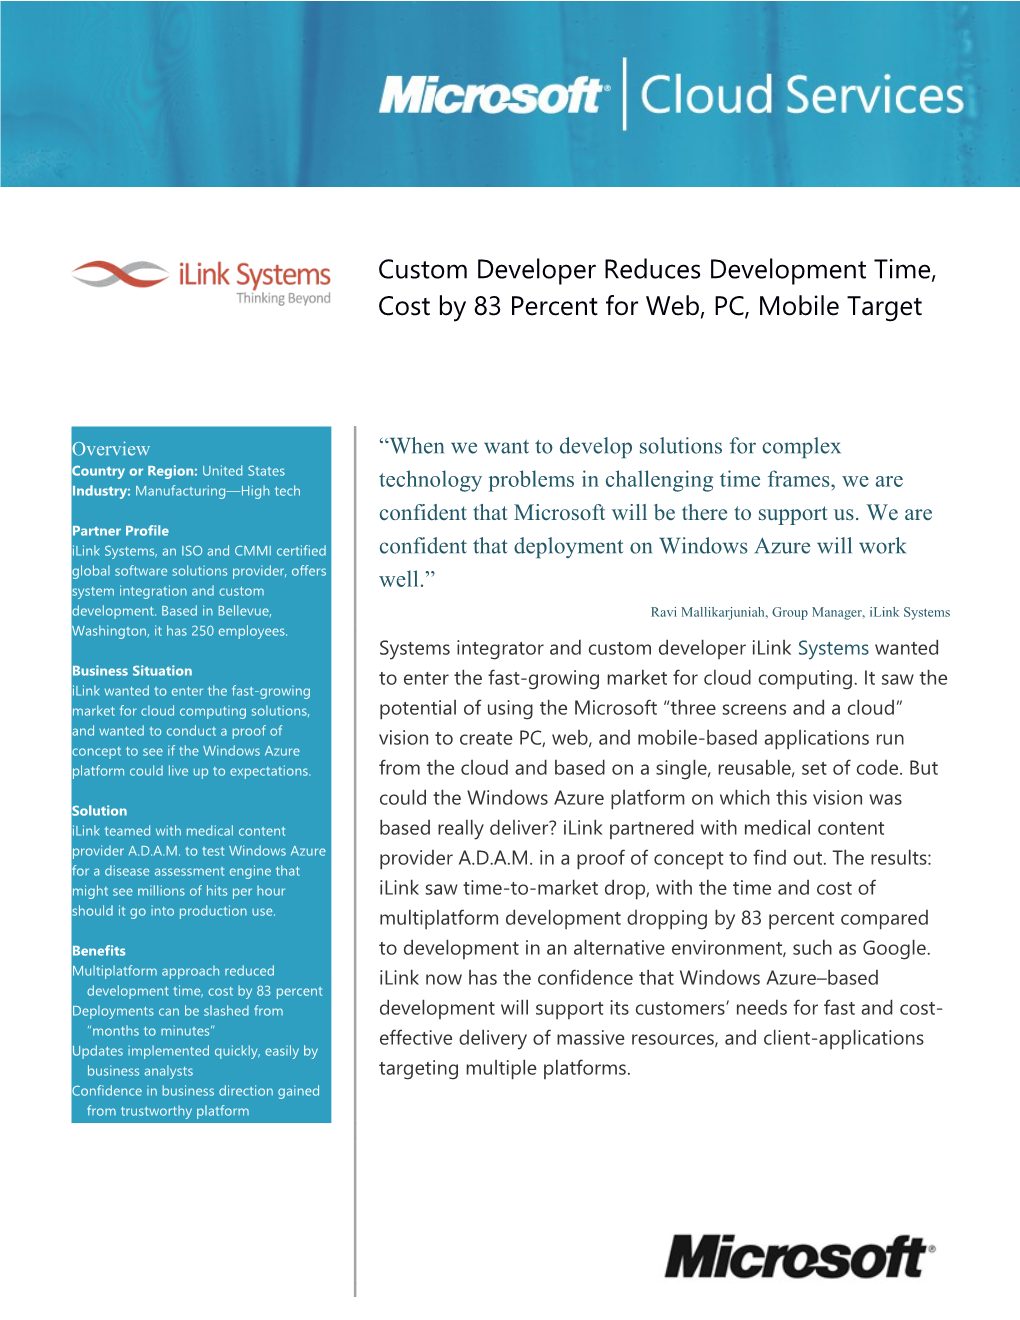 Multiplatform Approach Reduced Development Time, Cost by 83 Percent